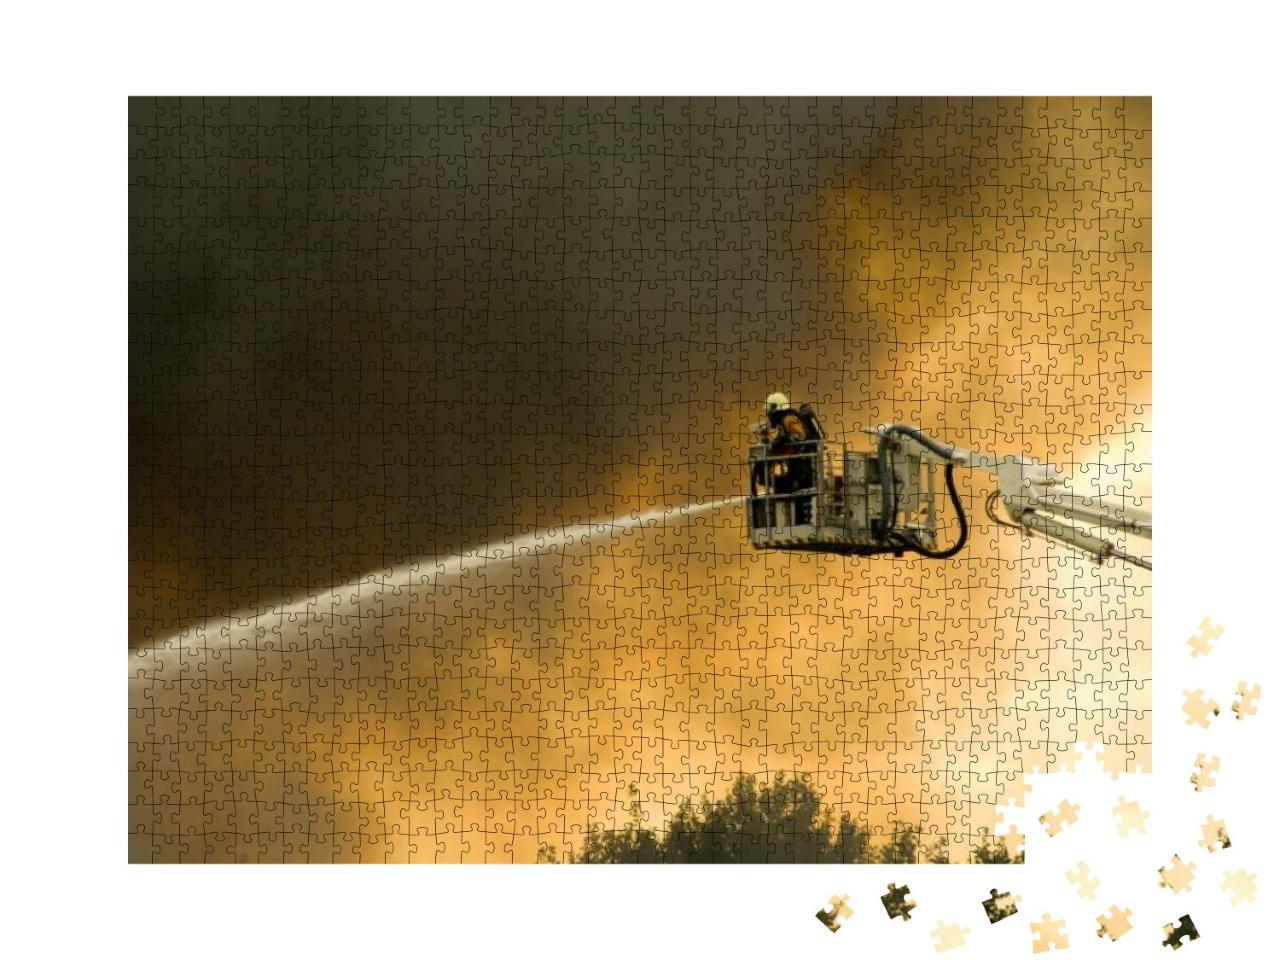 A Huge Fire with Firefighters in Action... Jigsaw Puzzle with 1000 pieces